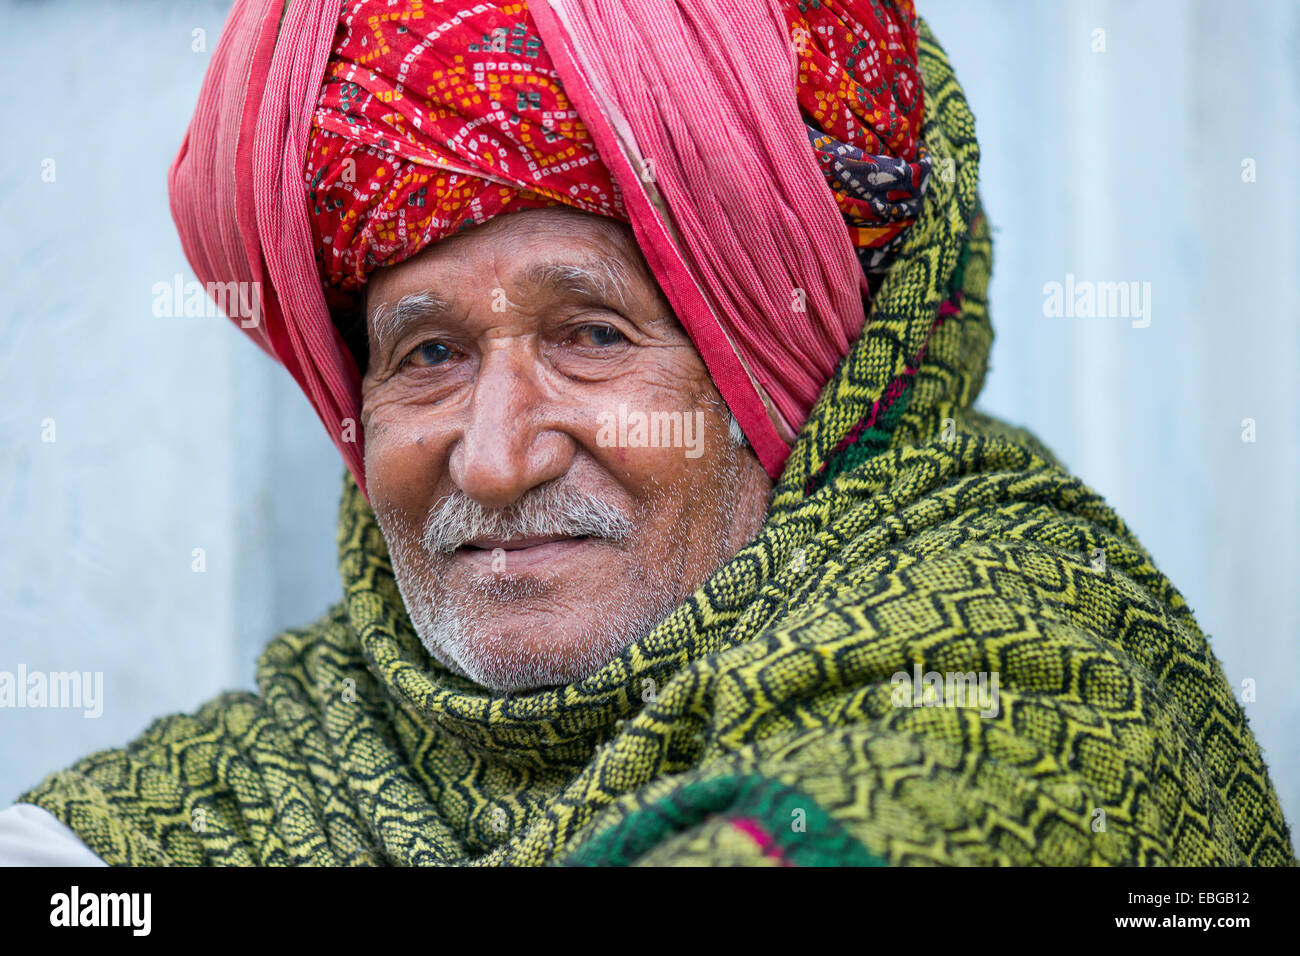 Elderly Indian man with a red turban, Bassi, Rajasthan, India Stock Photo